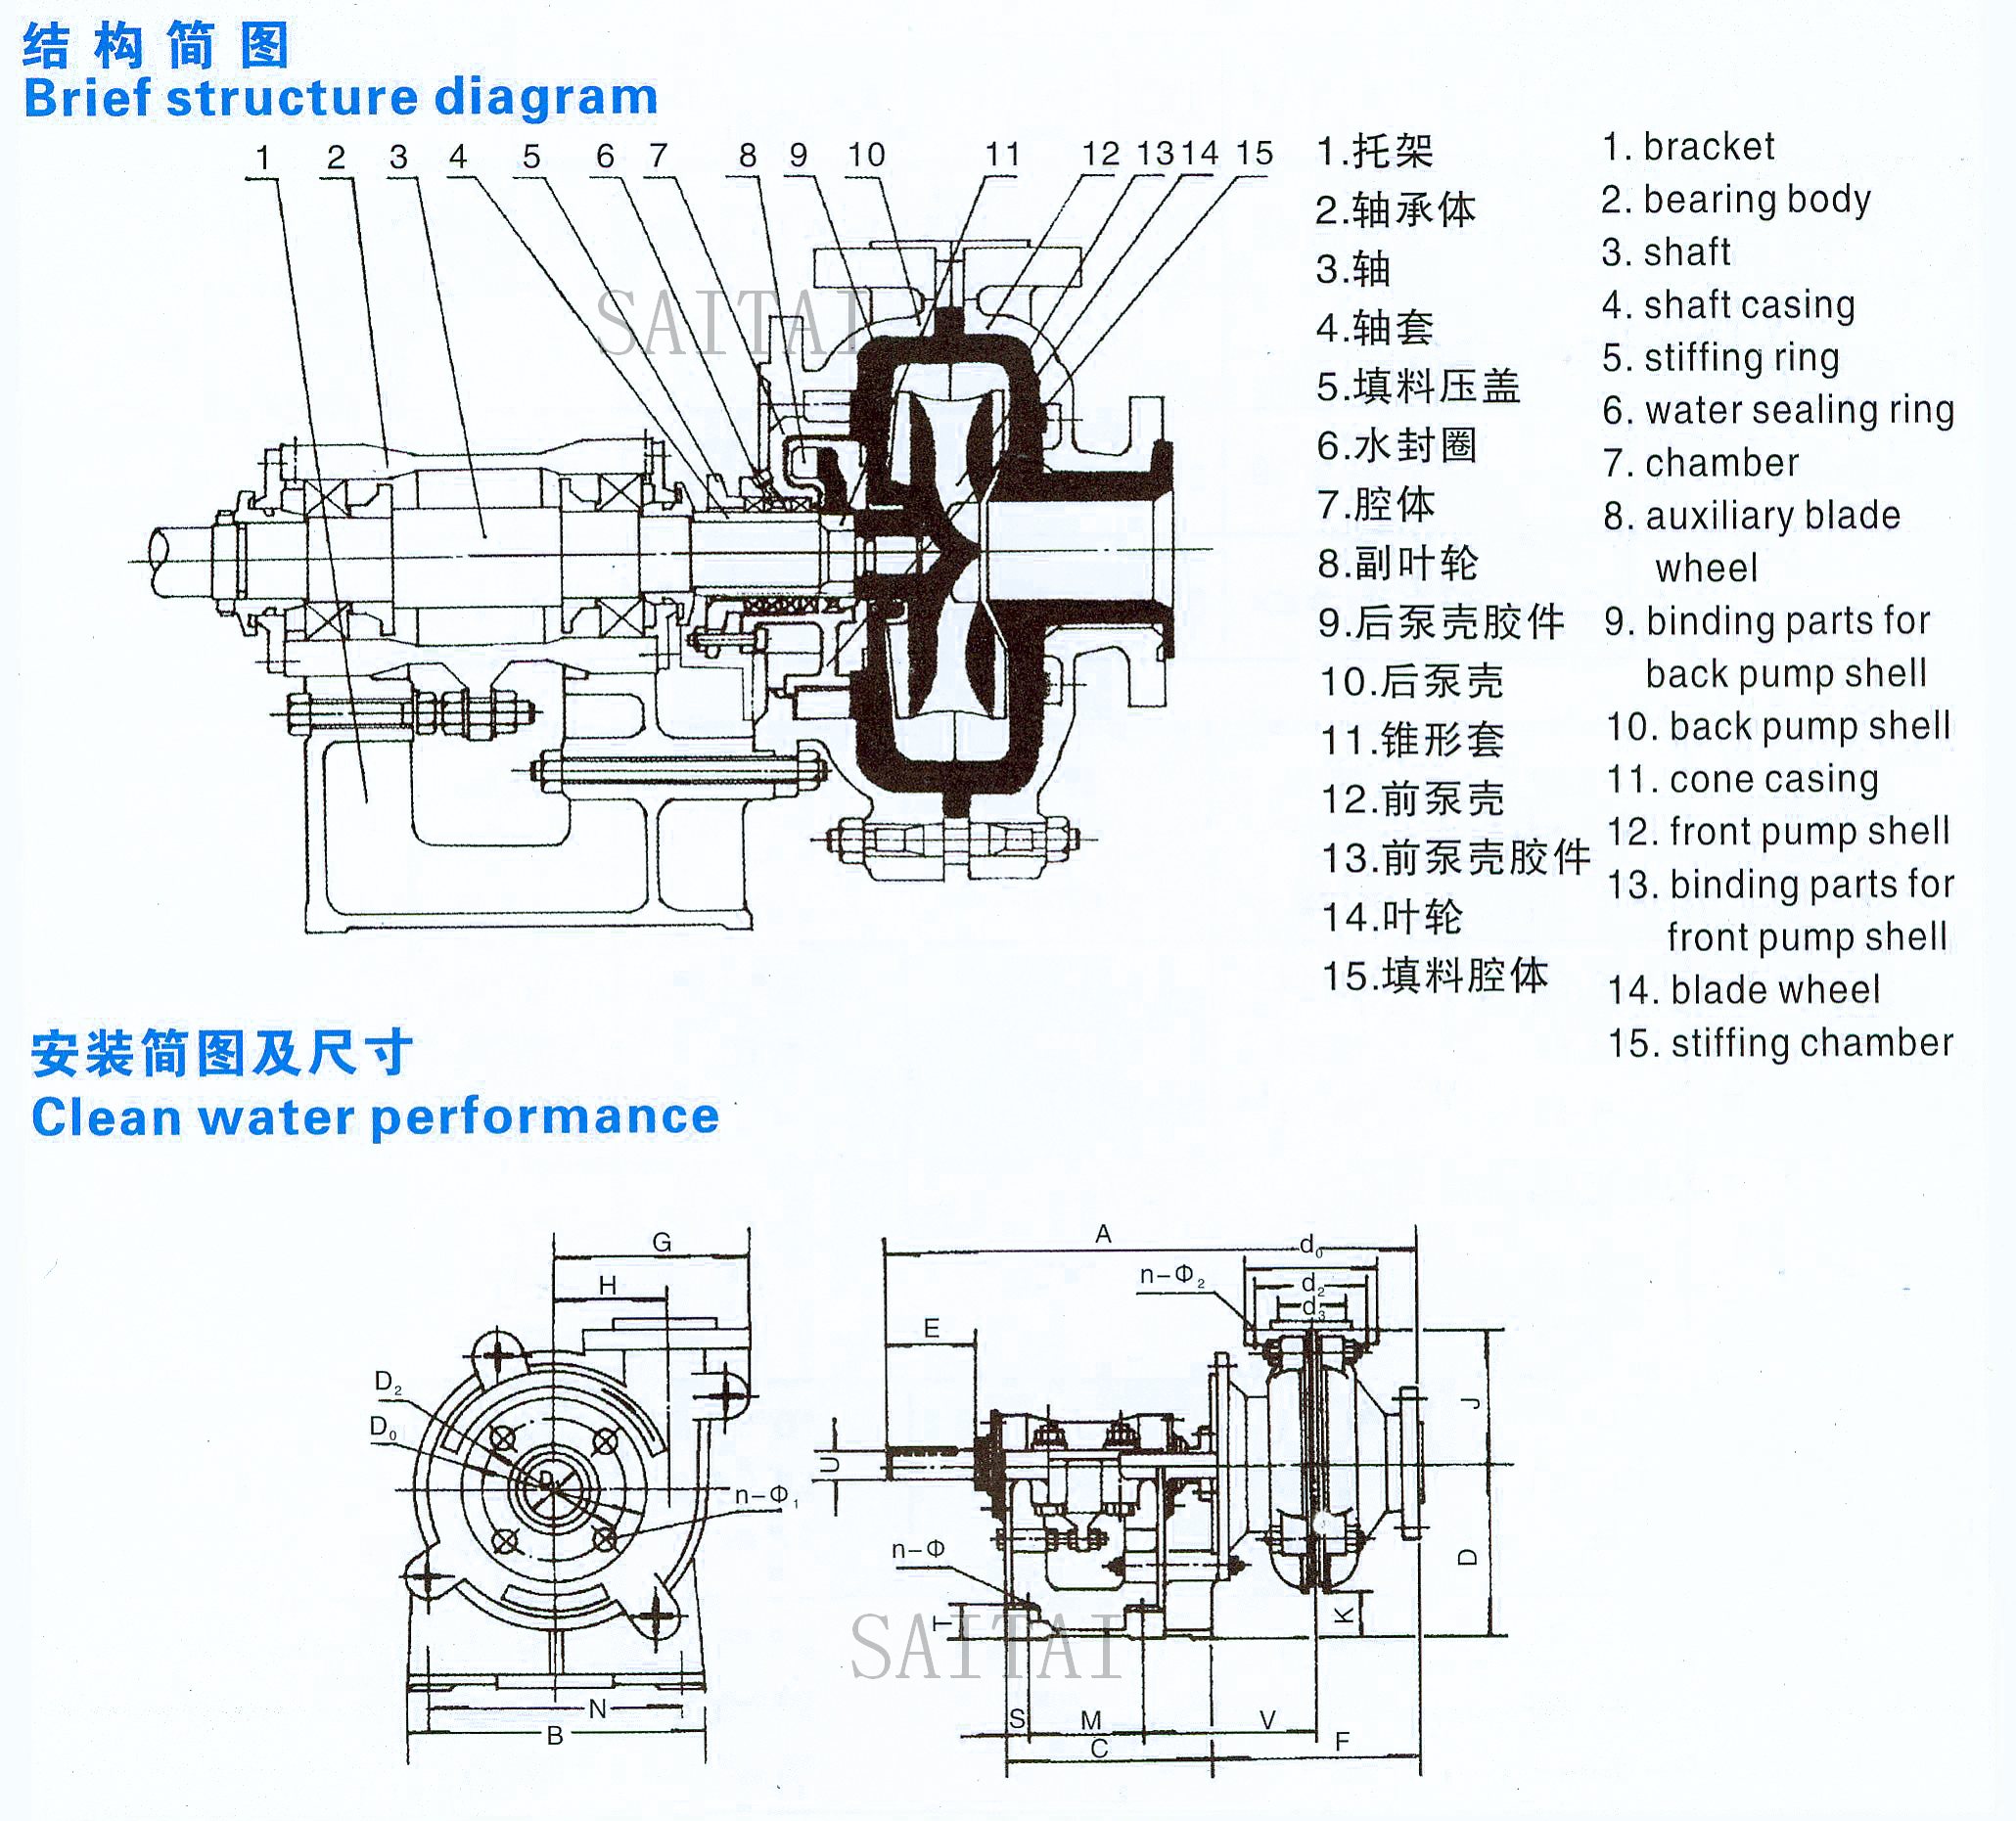 Brief tructure diagram And Clean water performance